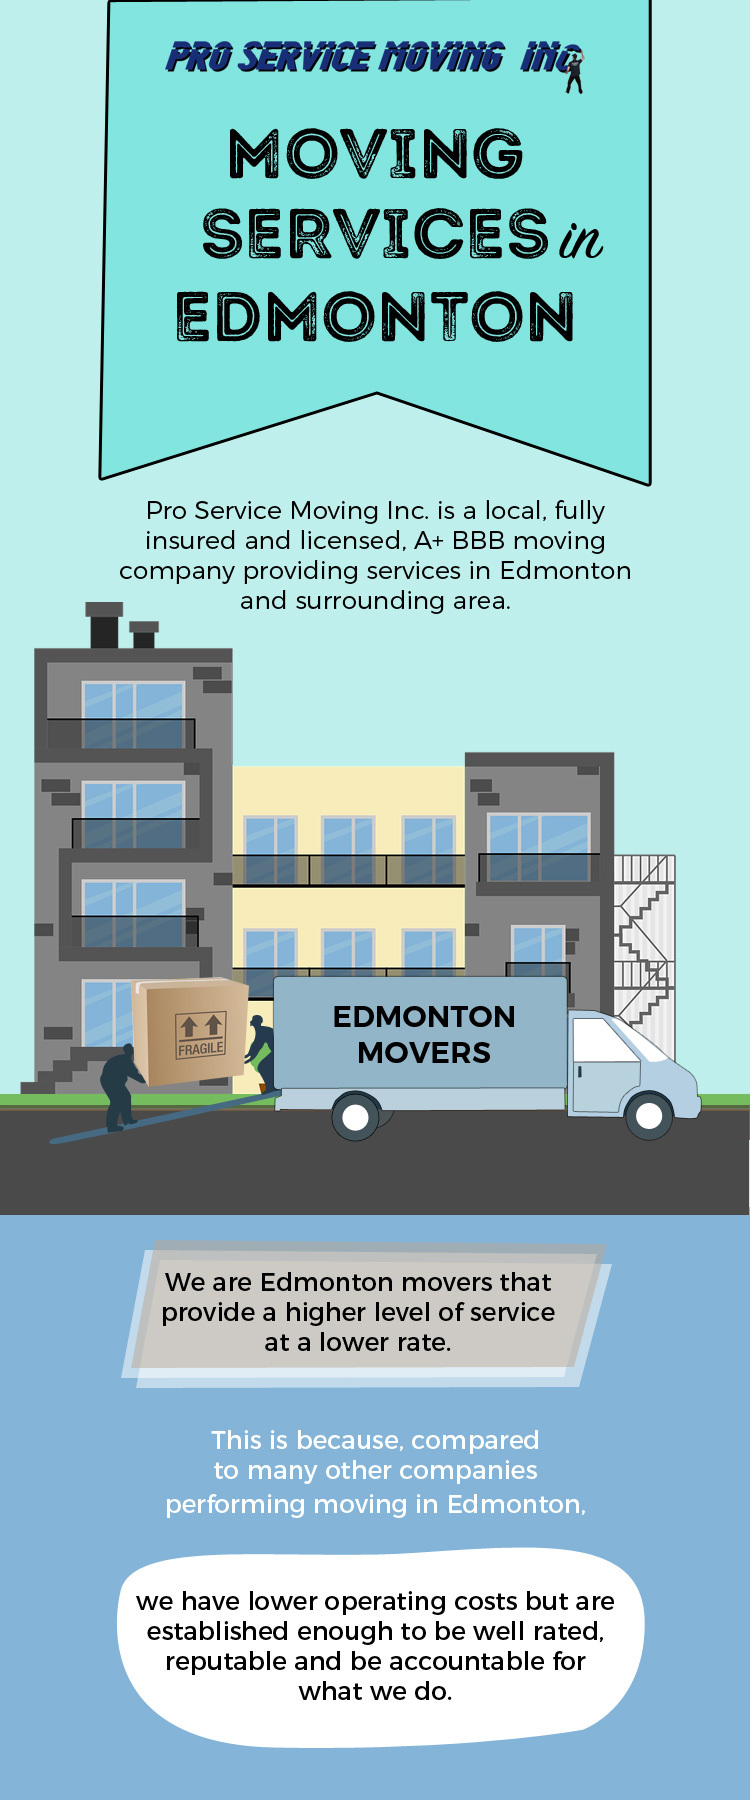 Pro Service Moving - A Reliable Moving Services Provider in Edmonton, AB